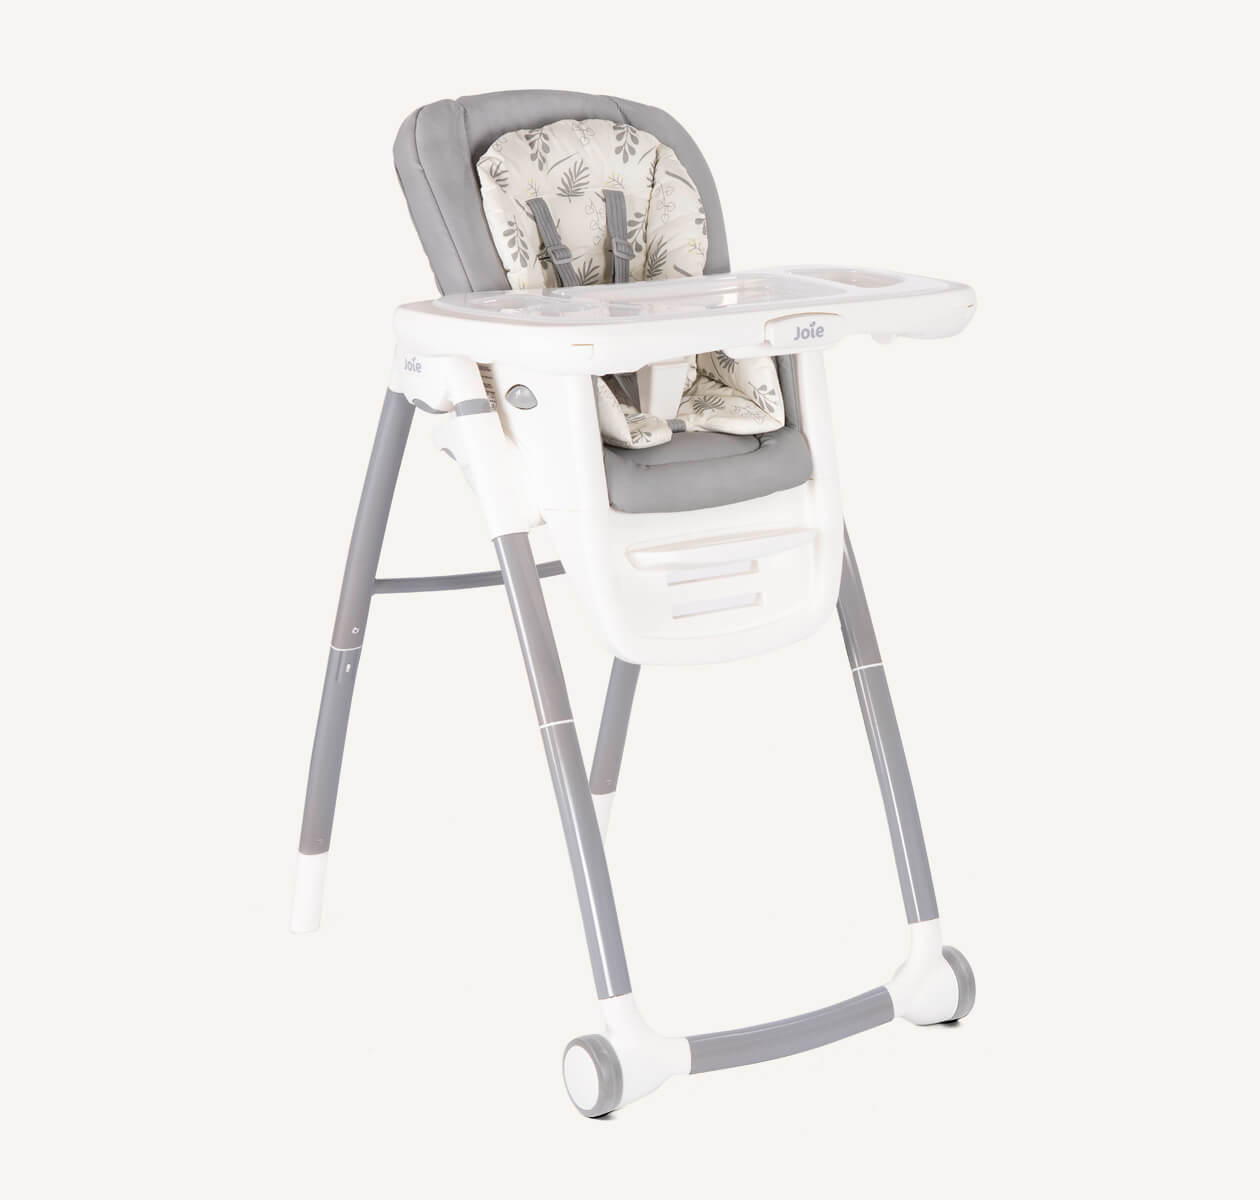 A light grey and white multiply highchair with front wheels and tray at a right angle 